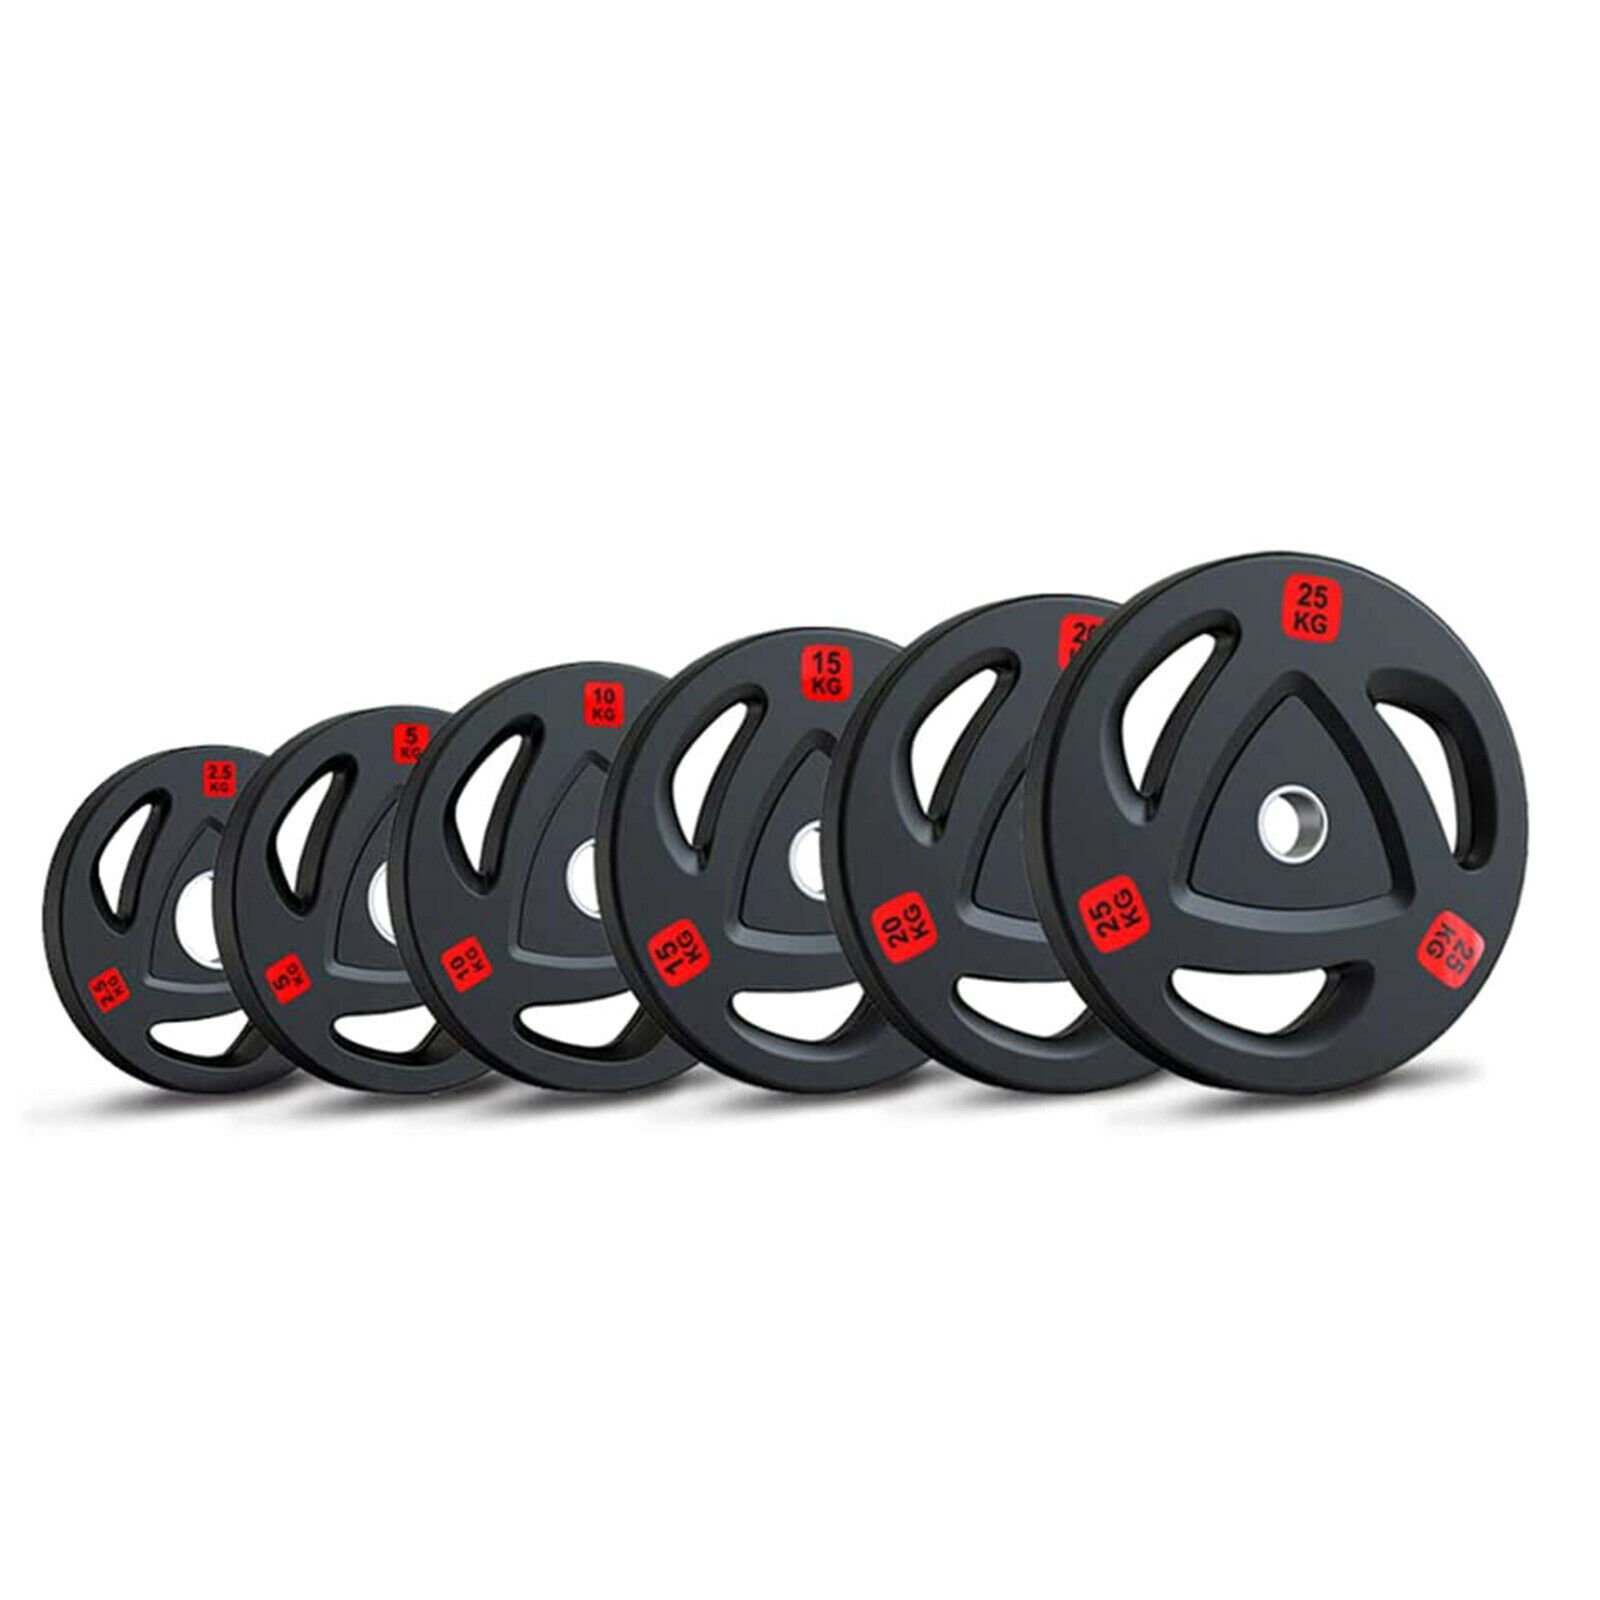 Miracle Fitness Tri-Grip Olympic Rubber Plates 2.5 Kg to 25 Kg